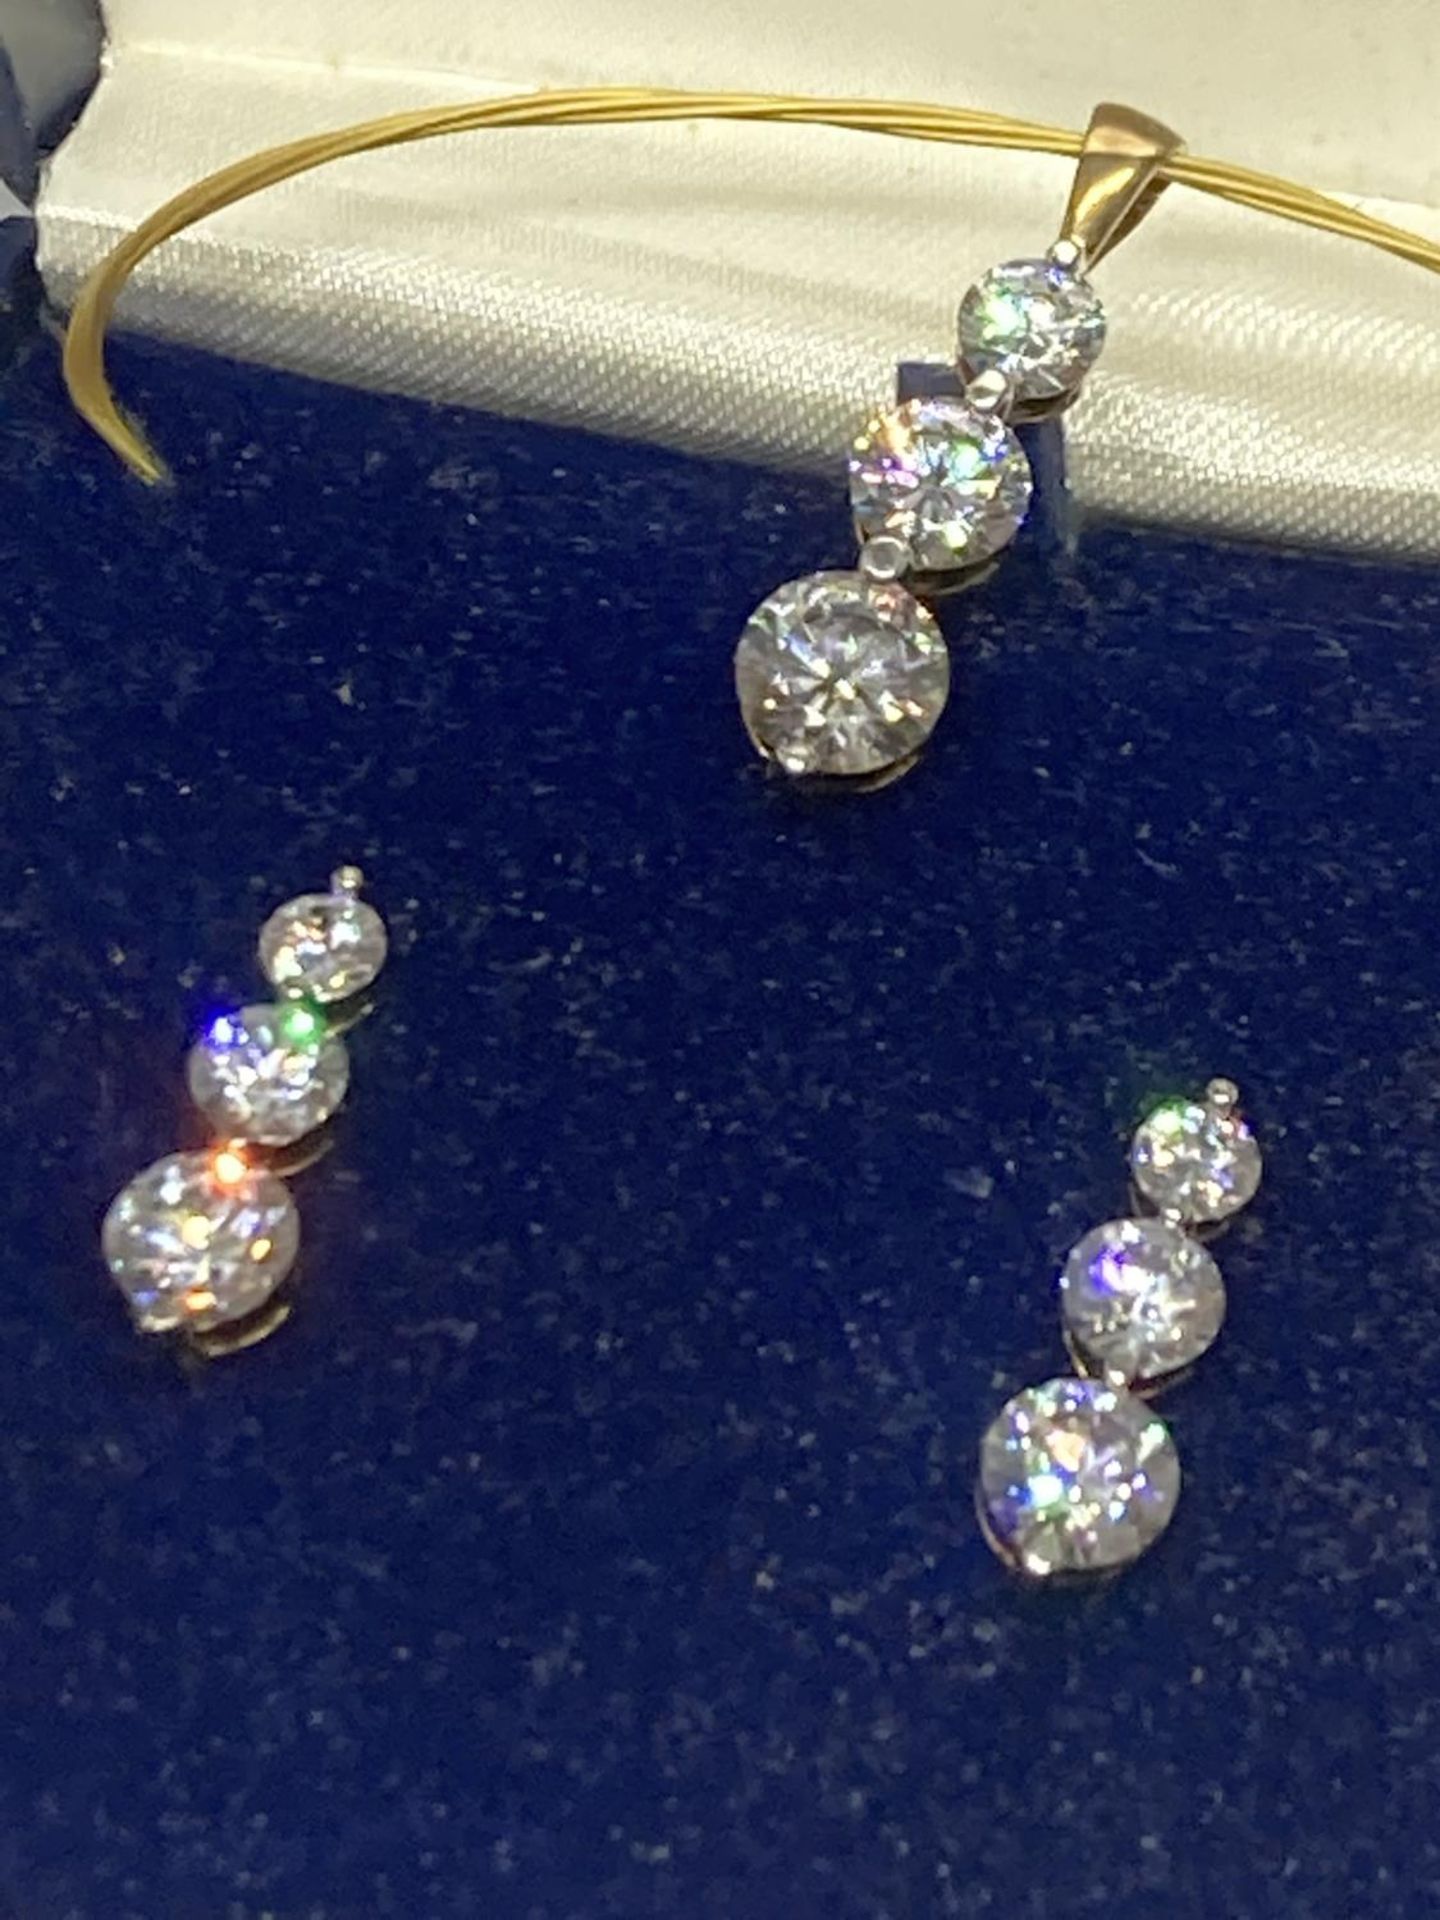 A SILVER CUBIC ZIRCONIA PENDANT AND EARRING SET IN A PRESENTATION BOX - Image 2 of 3